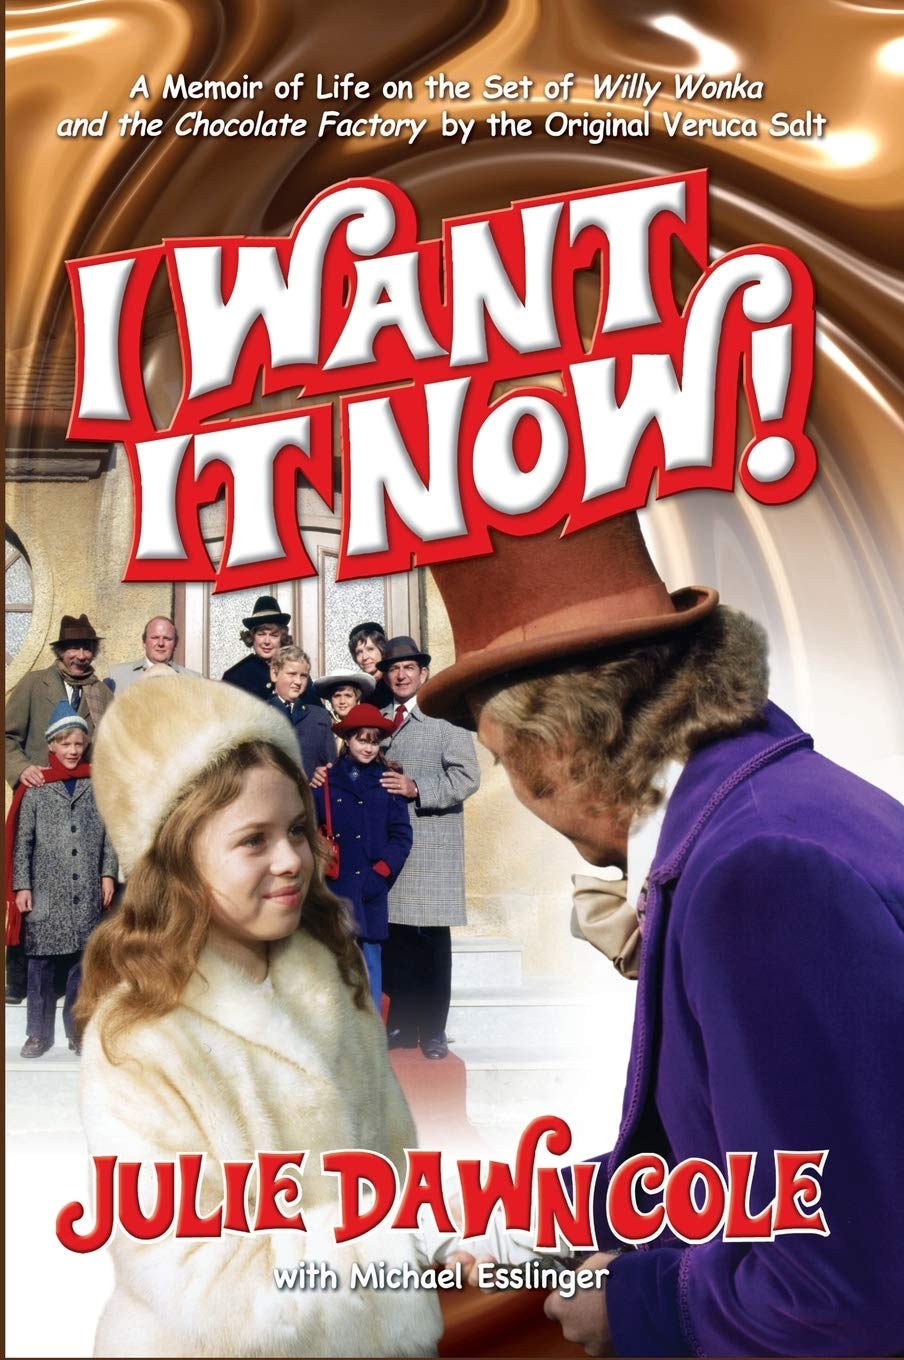 Buy I Want it Now! A Memoir of Life on the Set of Willy Wonka and the Chocolate Factory (hardback) Book Online at Low Prices in India. I Want it Now!